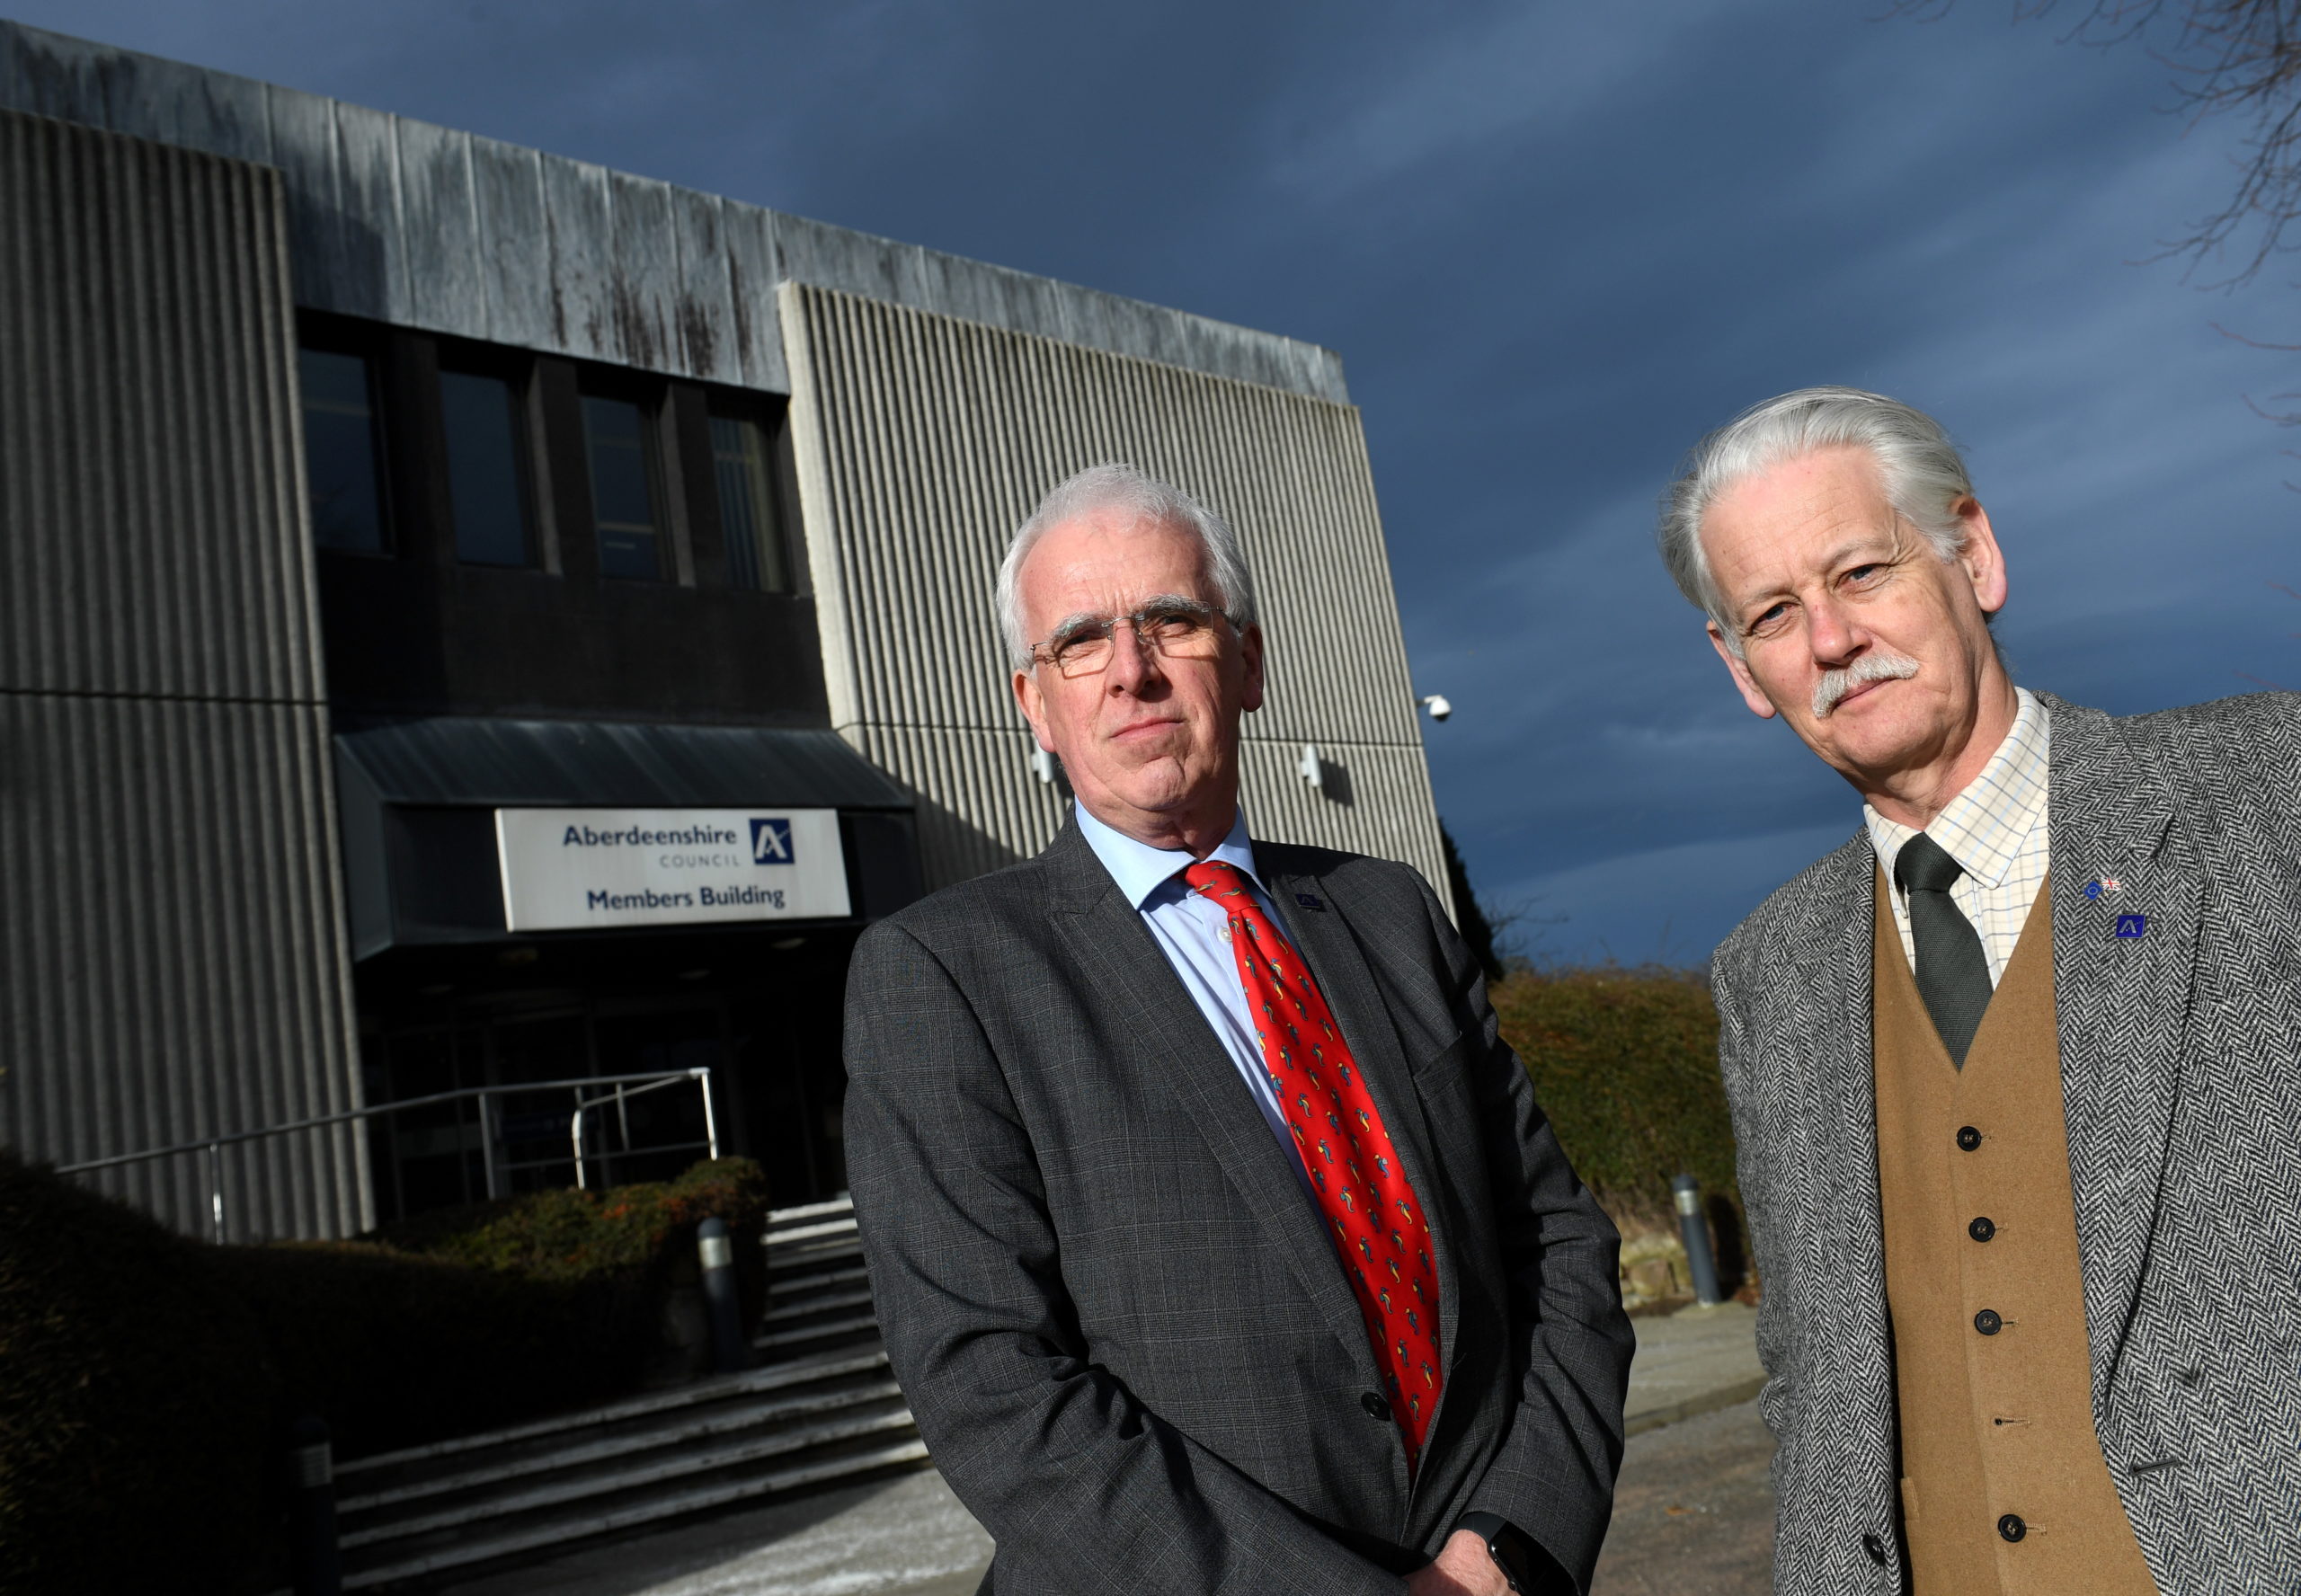 Aberdeenshire Council Leader Jim Gifford (left) and Deputy Leader Peter Argyll in March 2020, prior to lockdown.